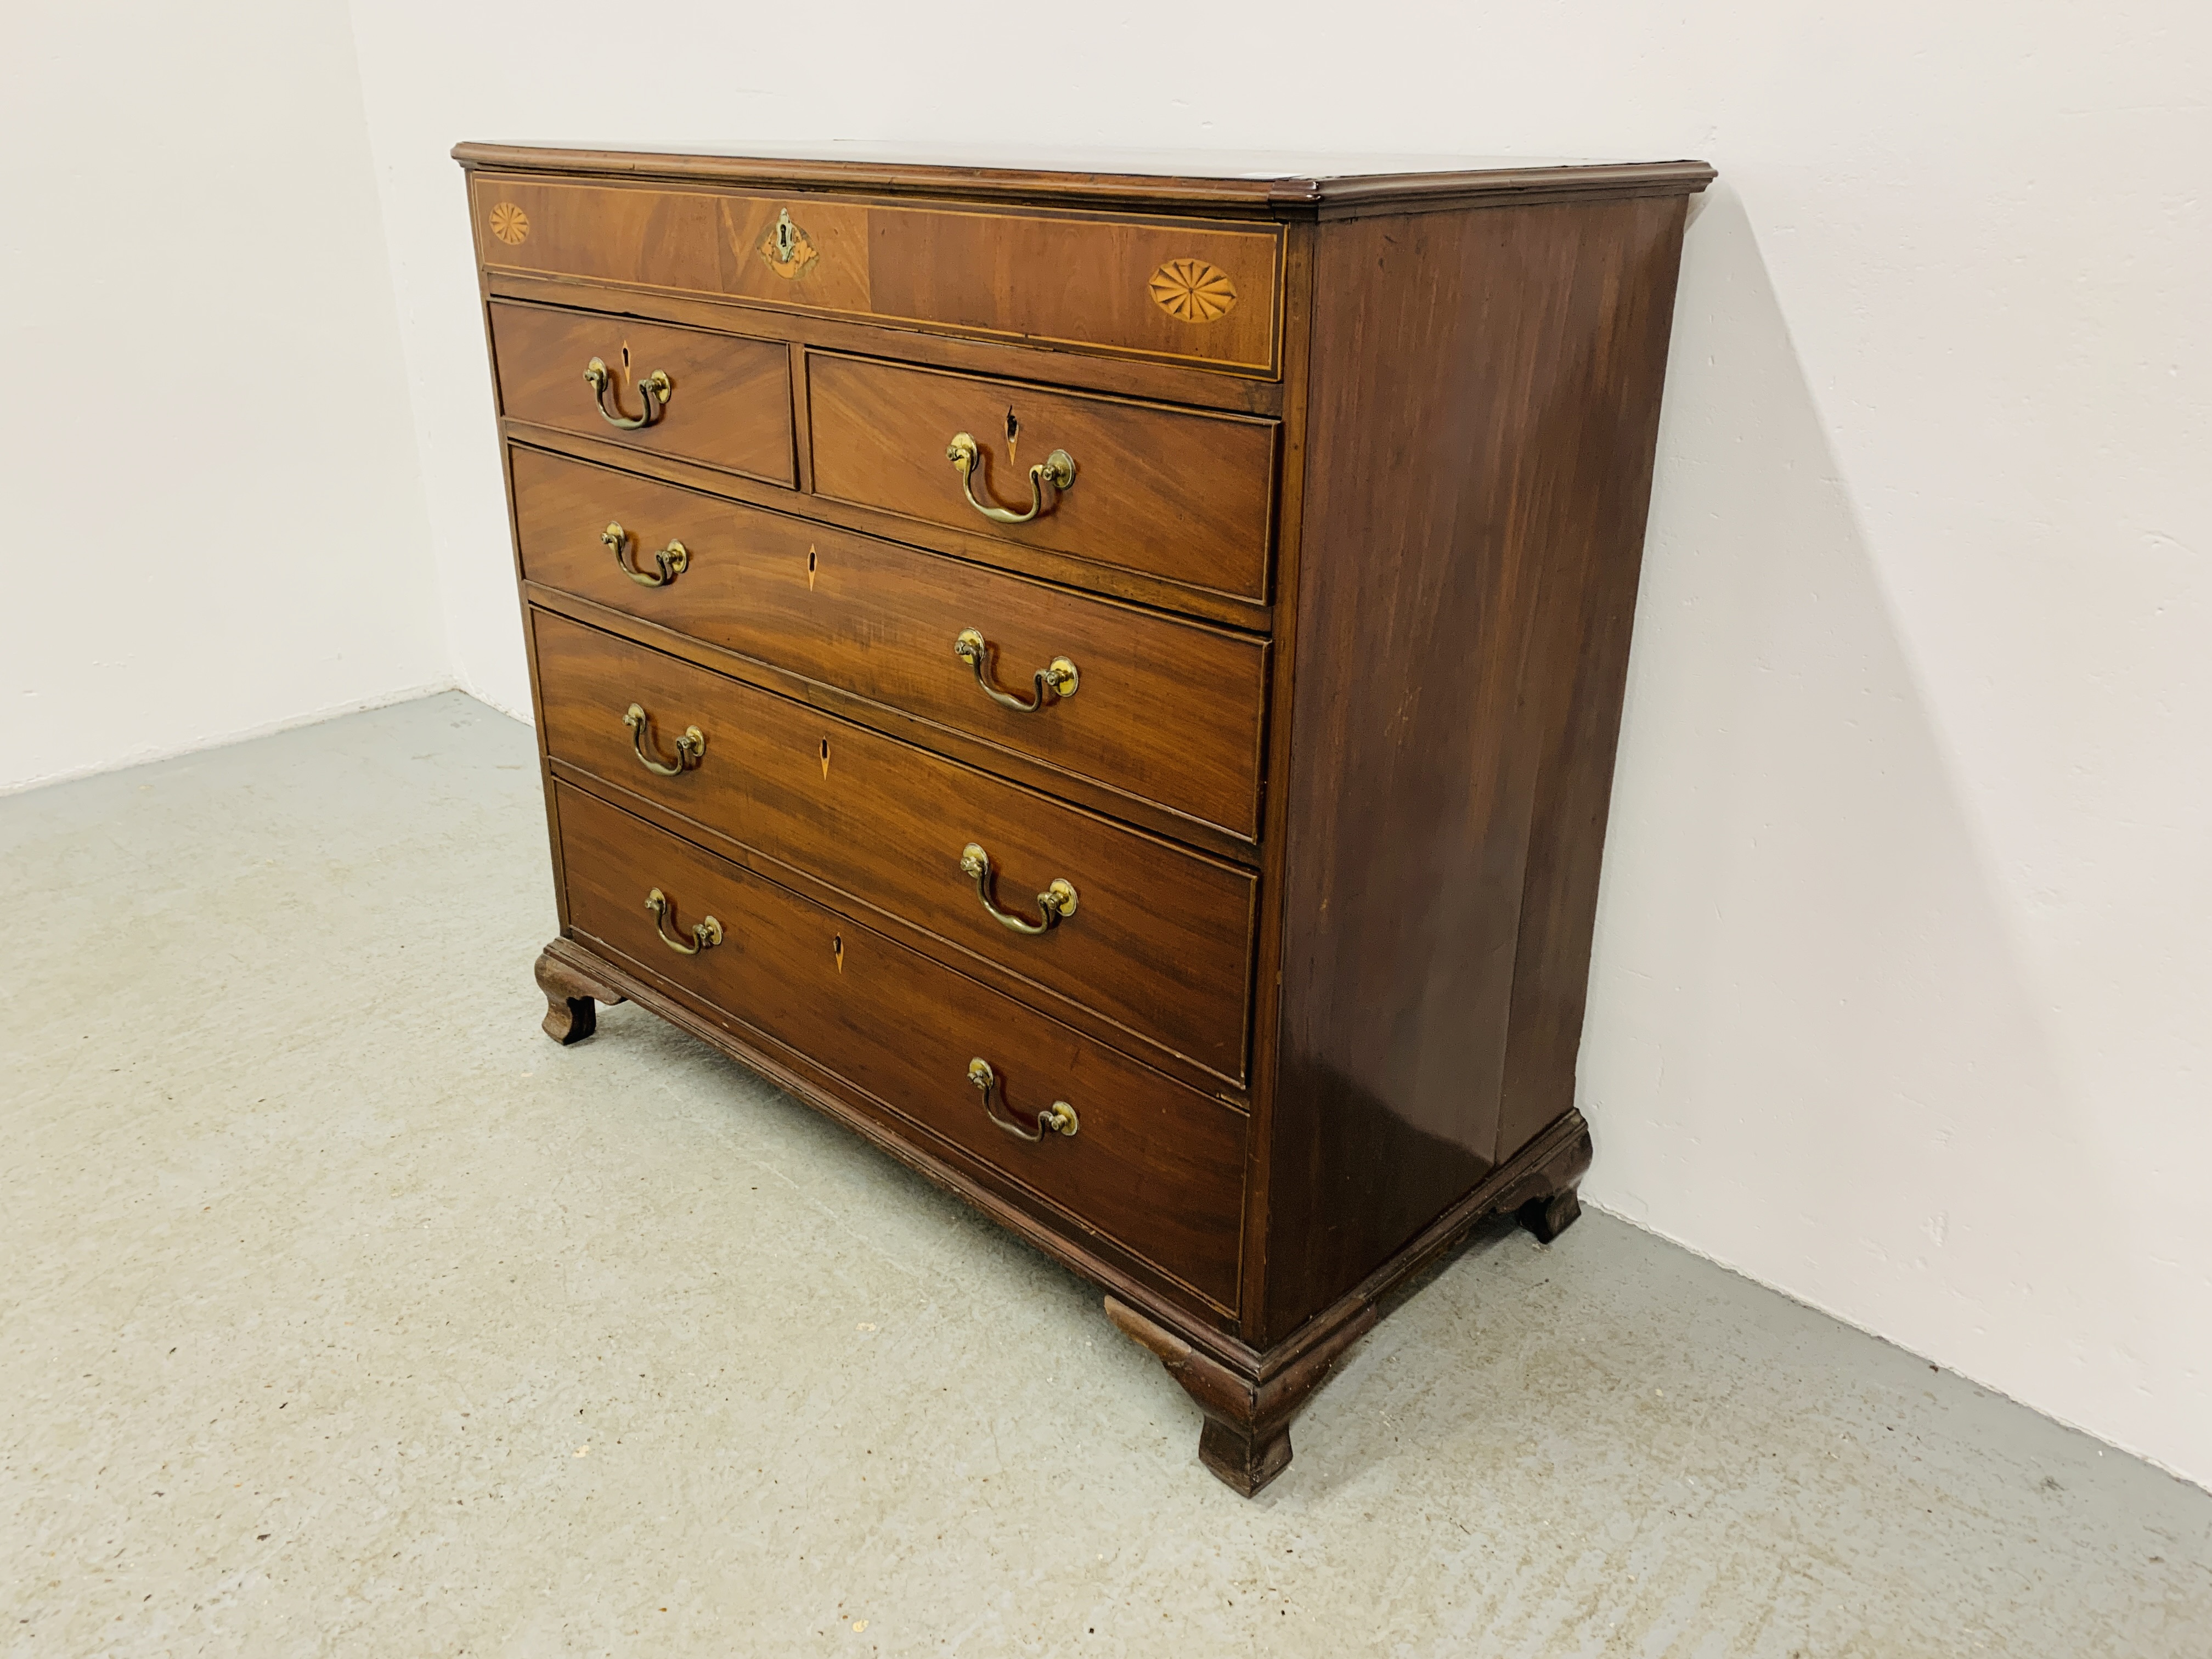 AN EARLY C19TH MAHOGANY SIX DRAWER CHEST, WIDTH 107CM. - Image 2 of 24